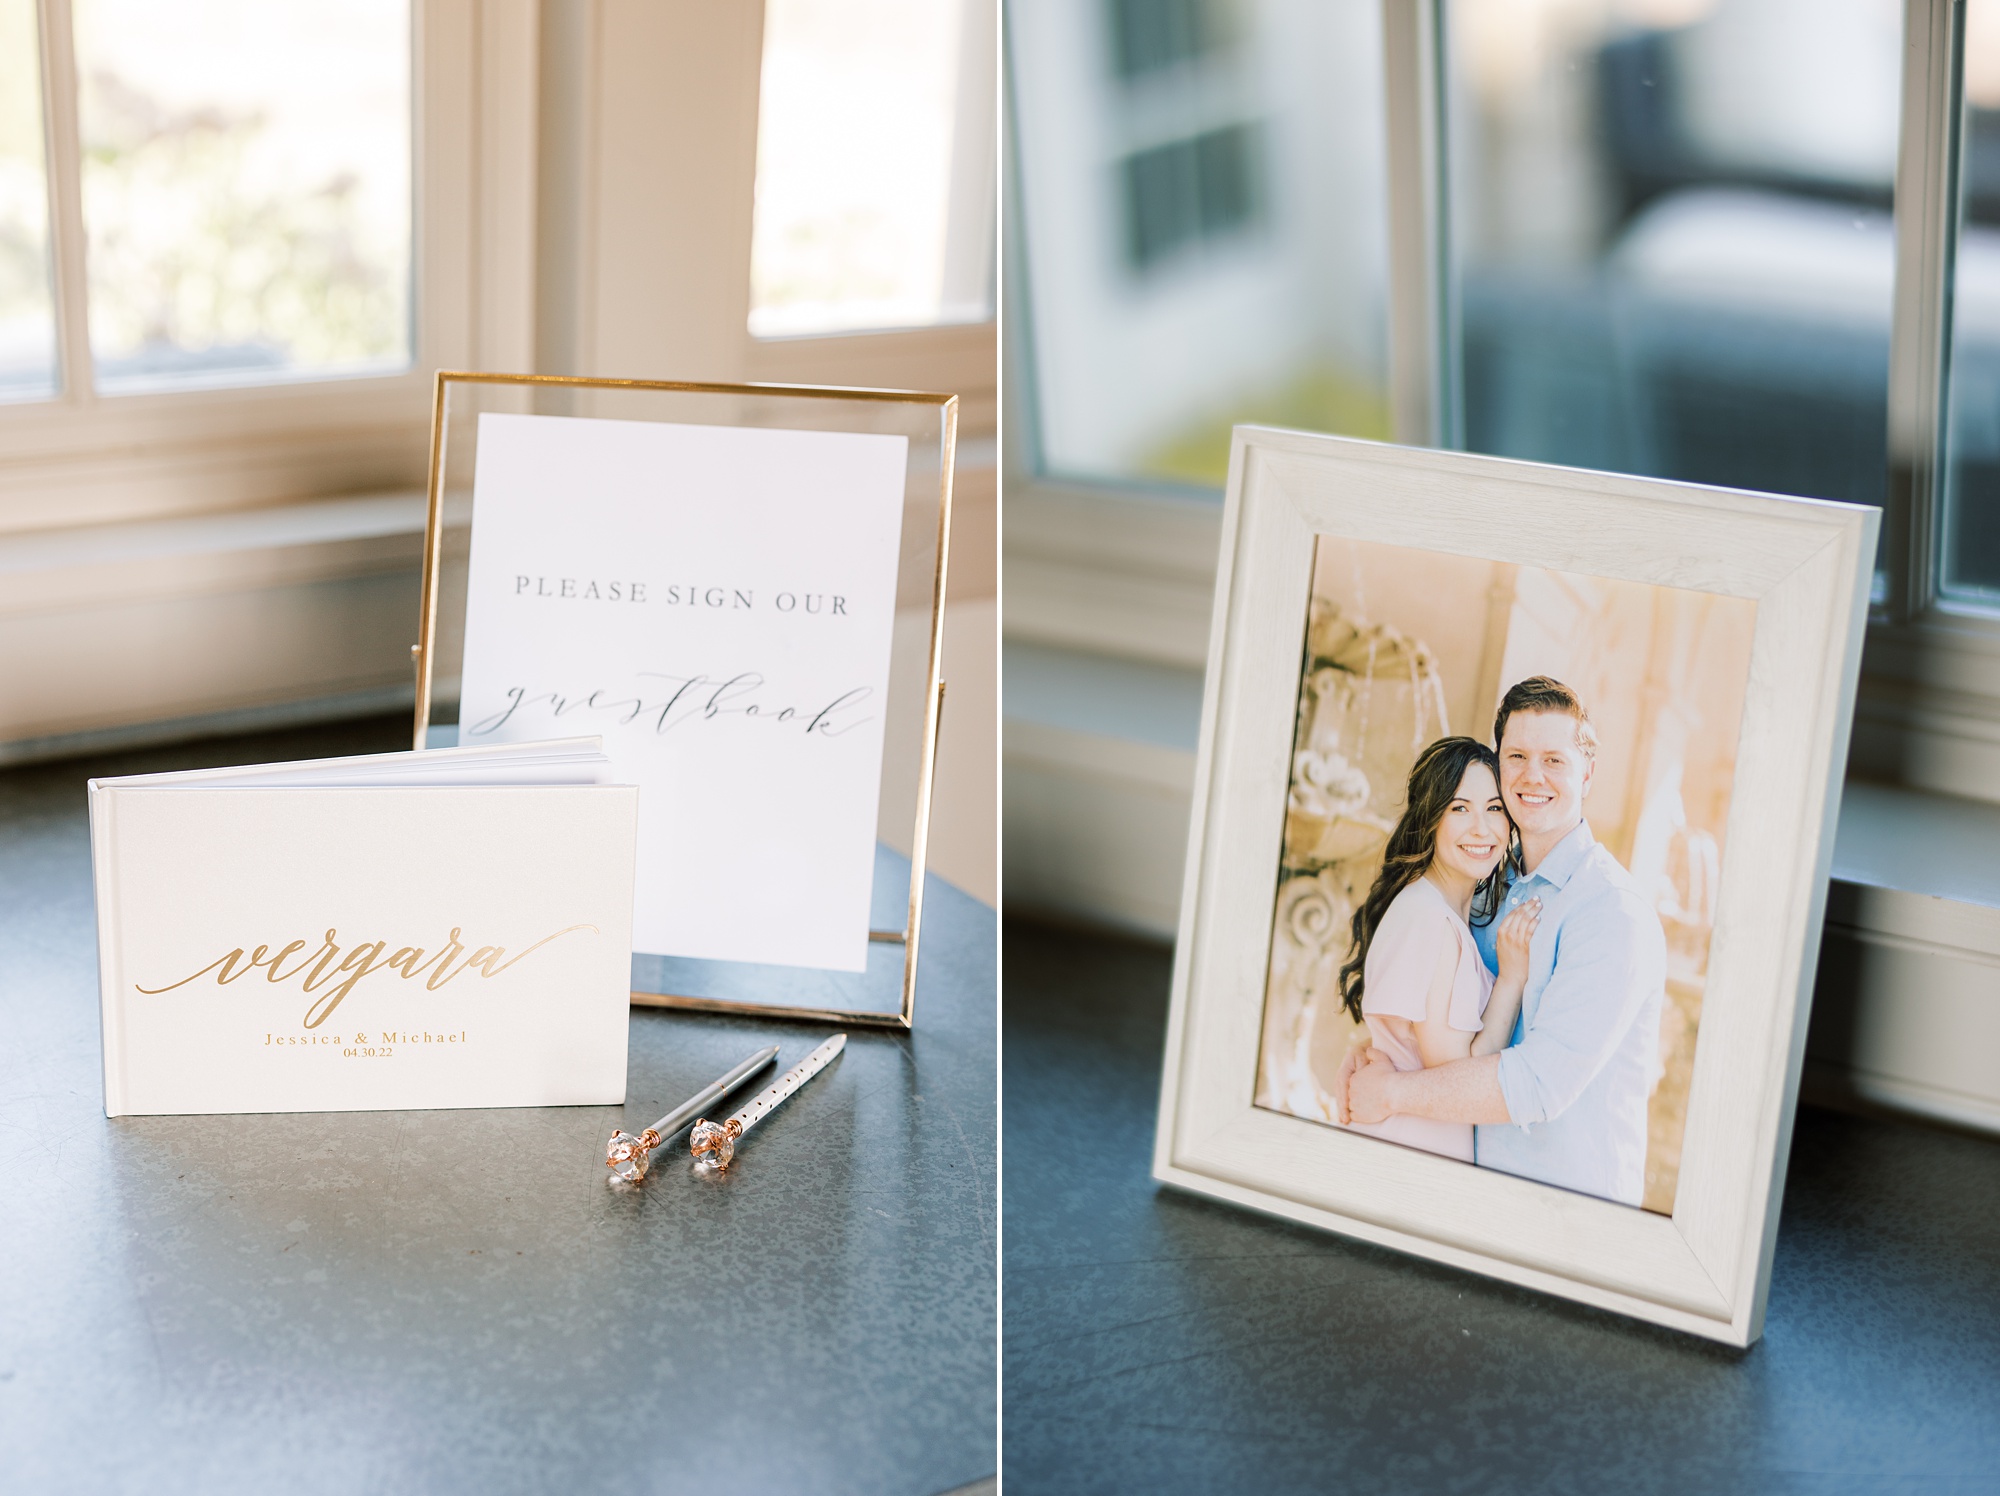 sign and photos for reception in PA